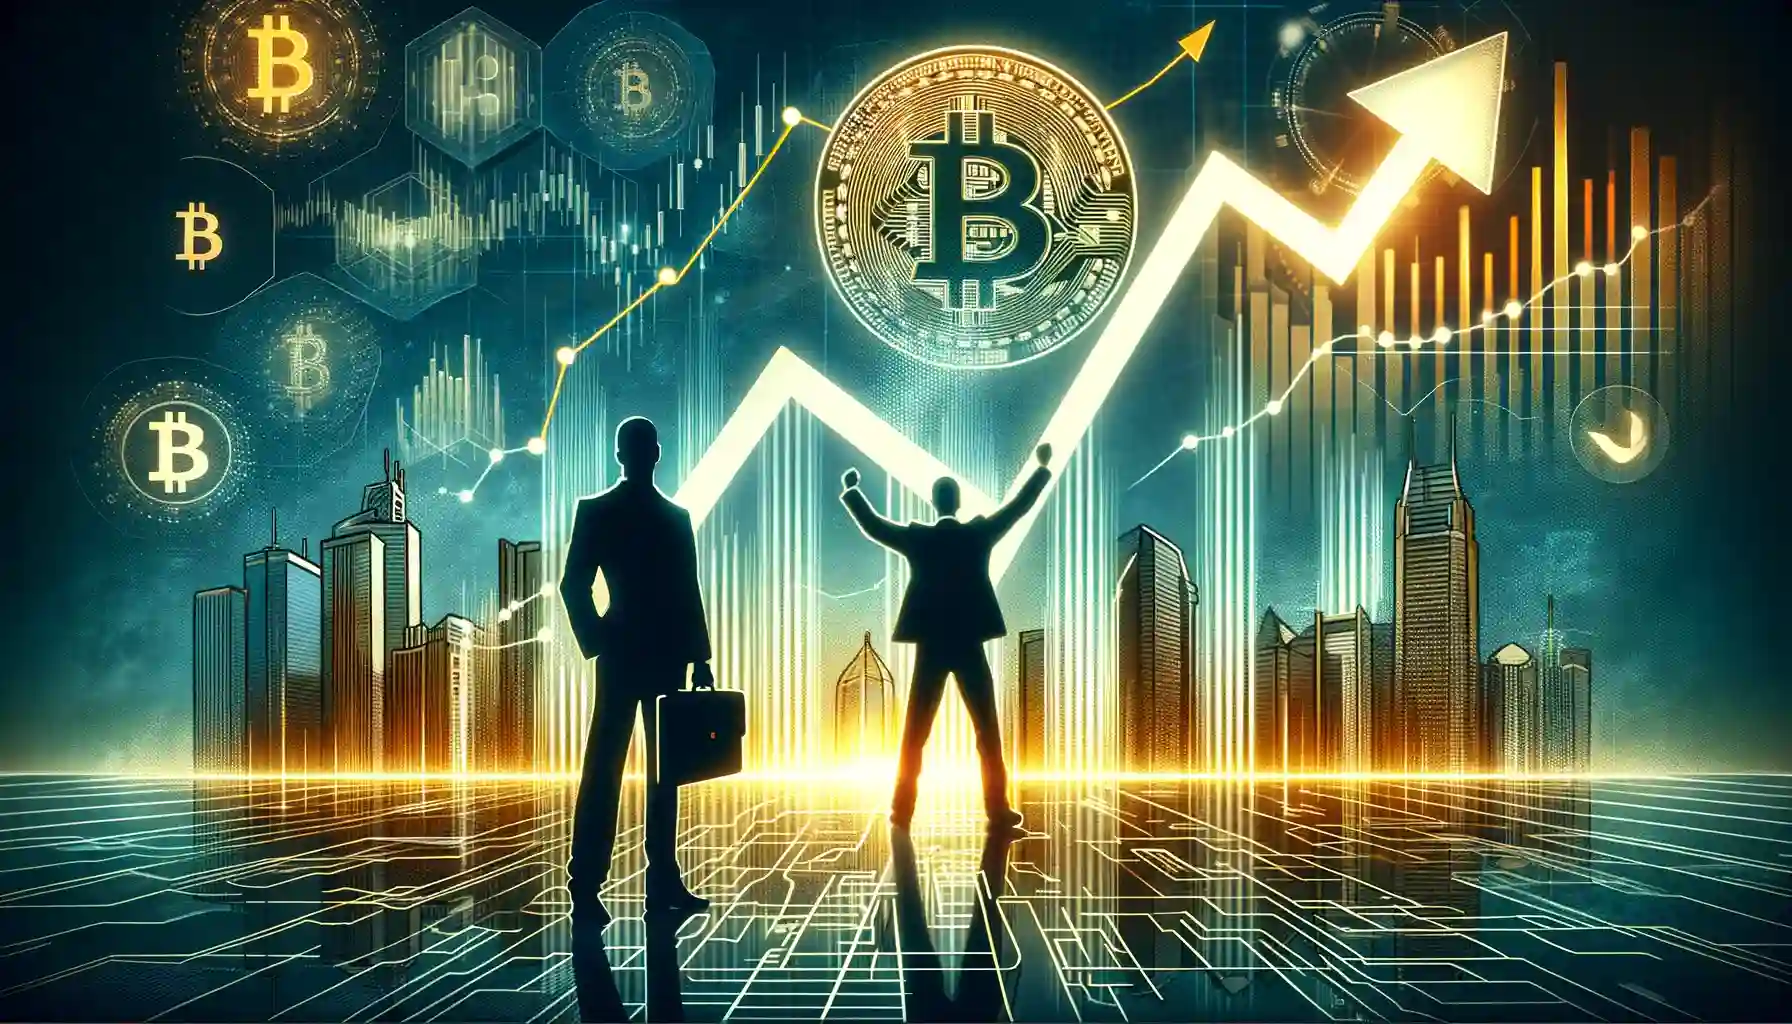 'Bitcoin will be the biggest...': Cathie Wood predicts this for BTC by 2030